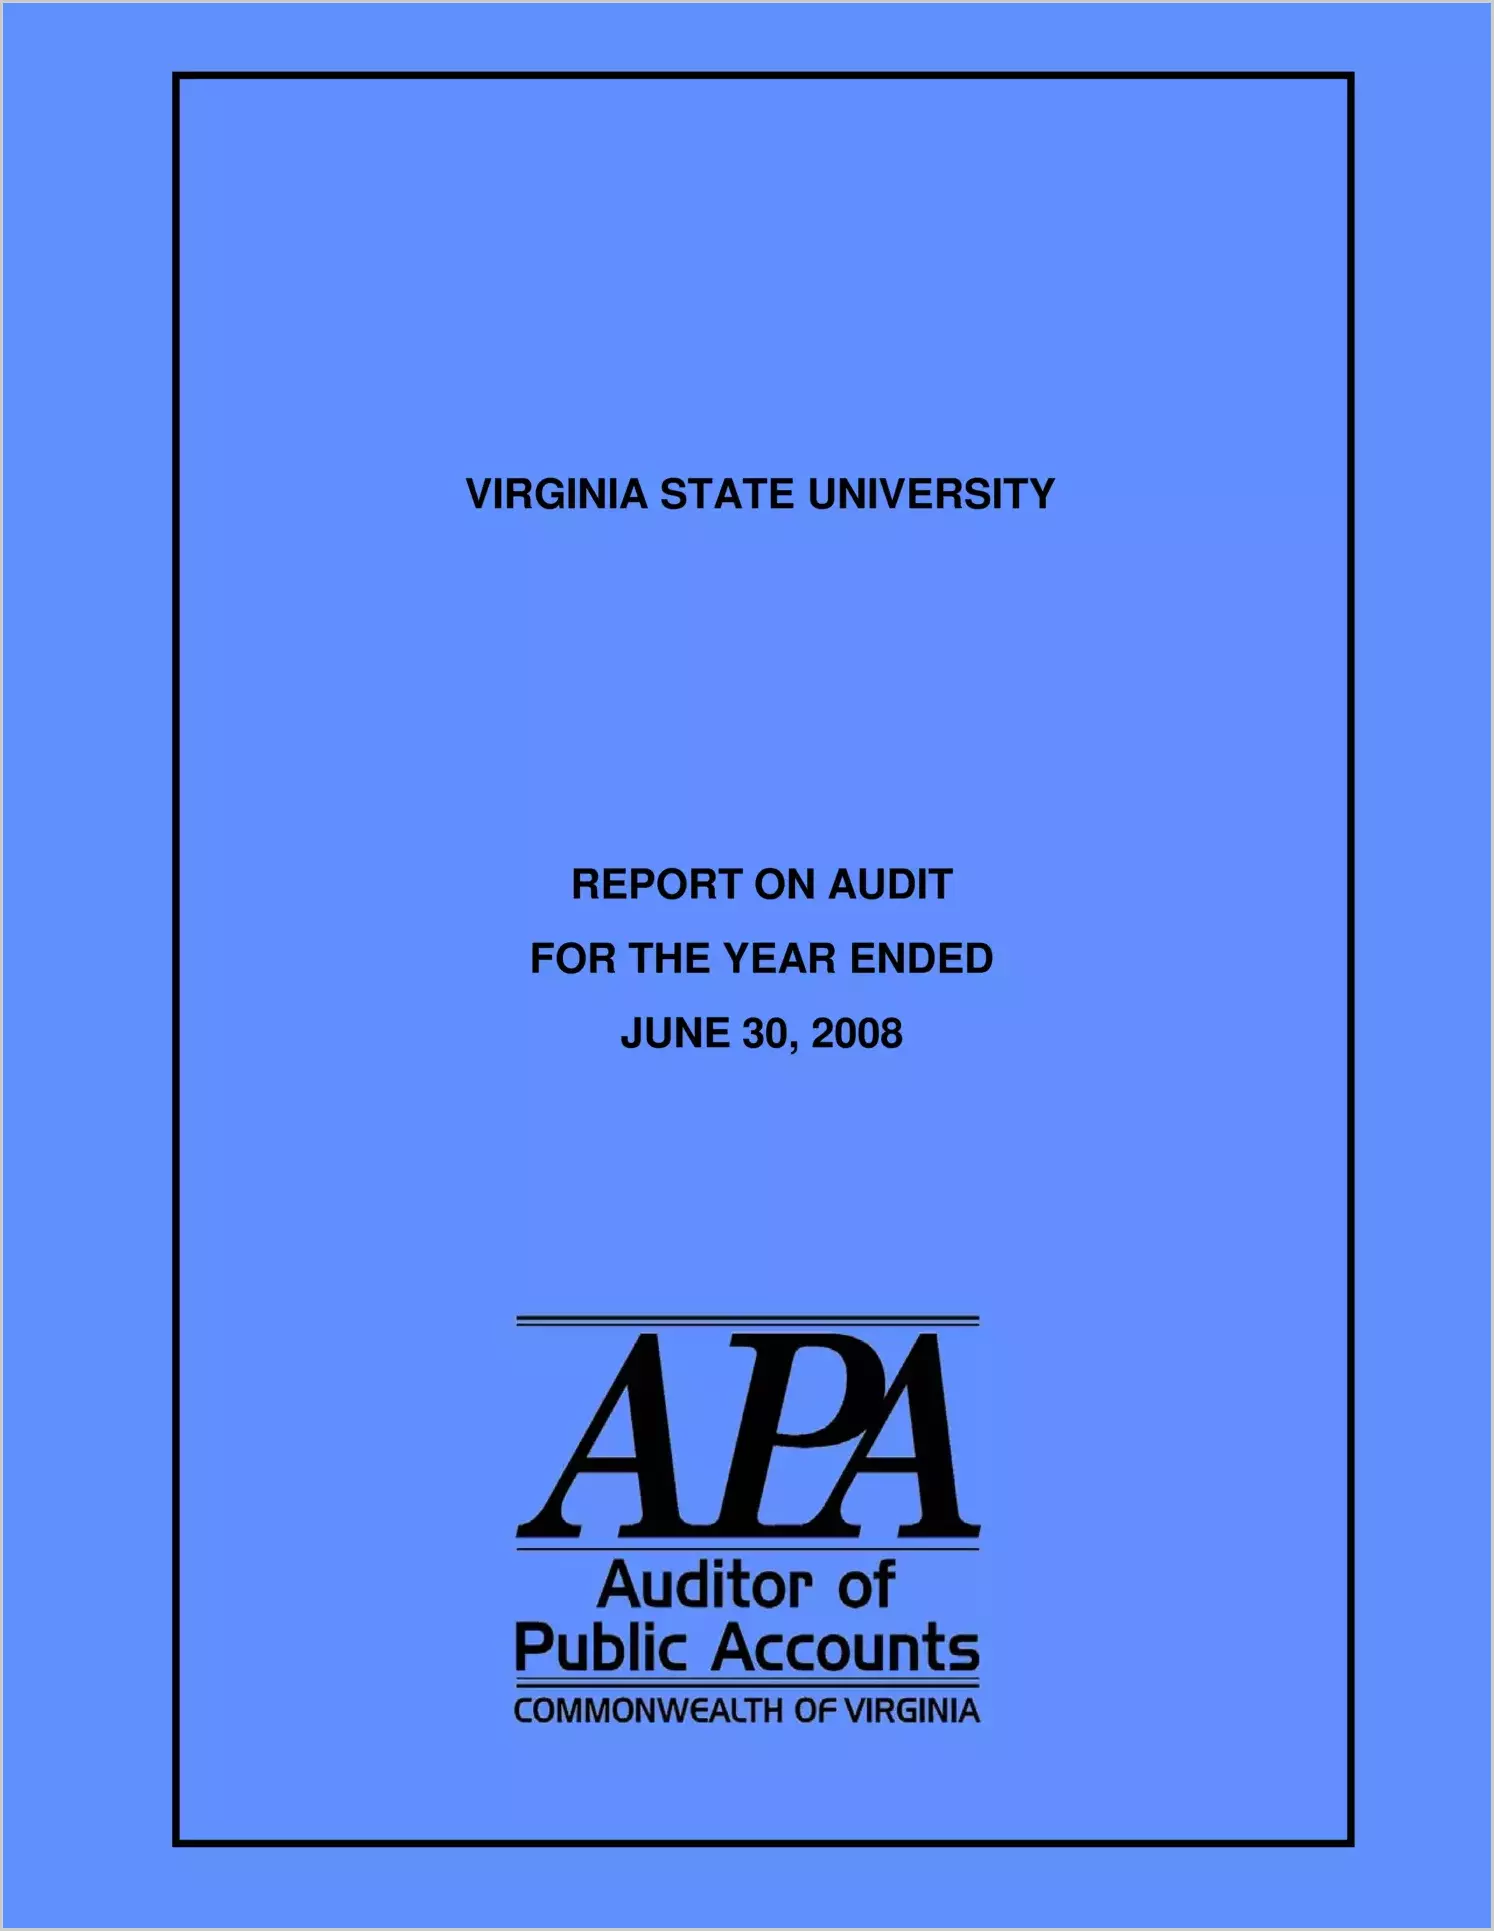 Virginia State University for the year ended June 30, 2008